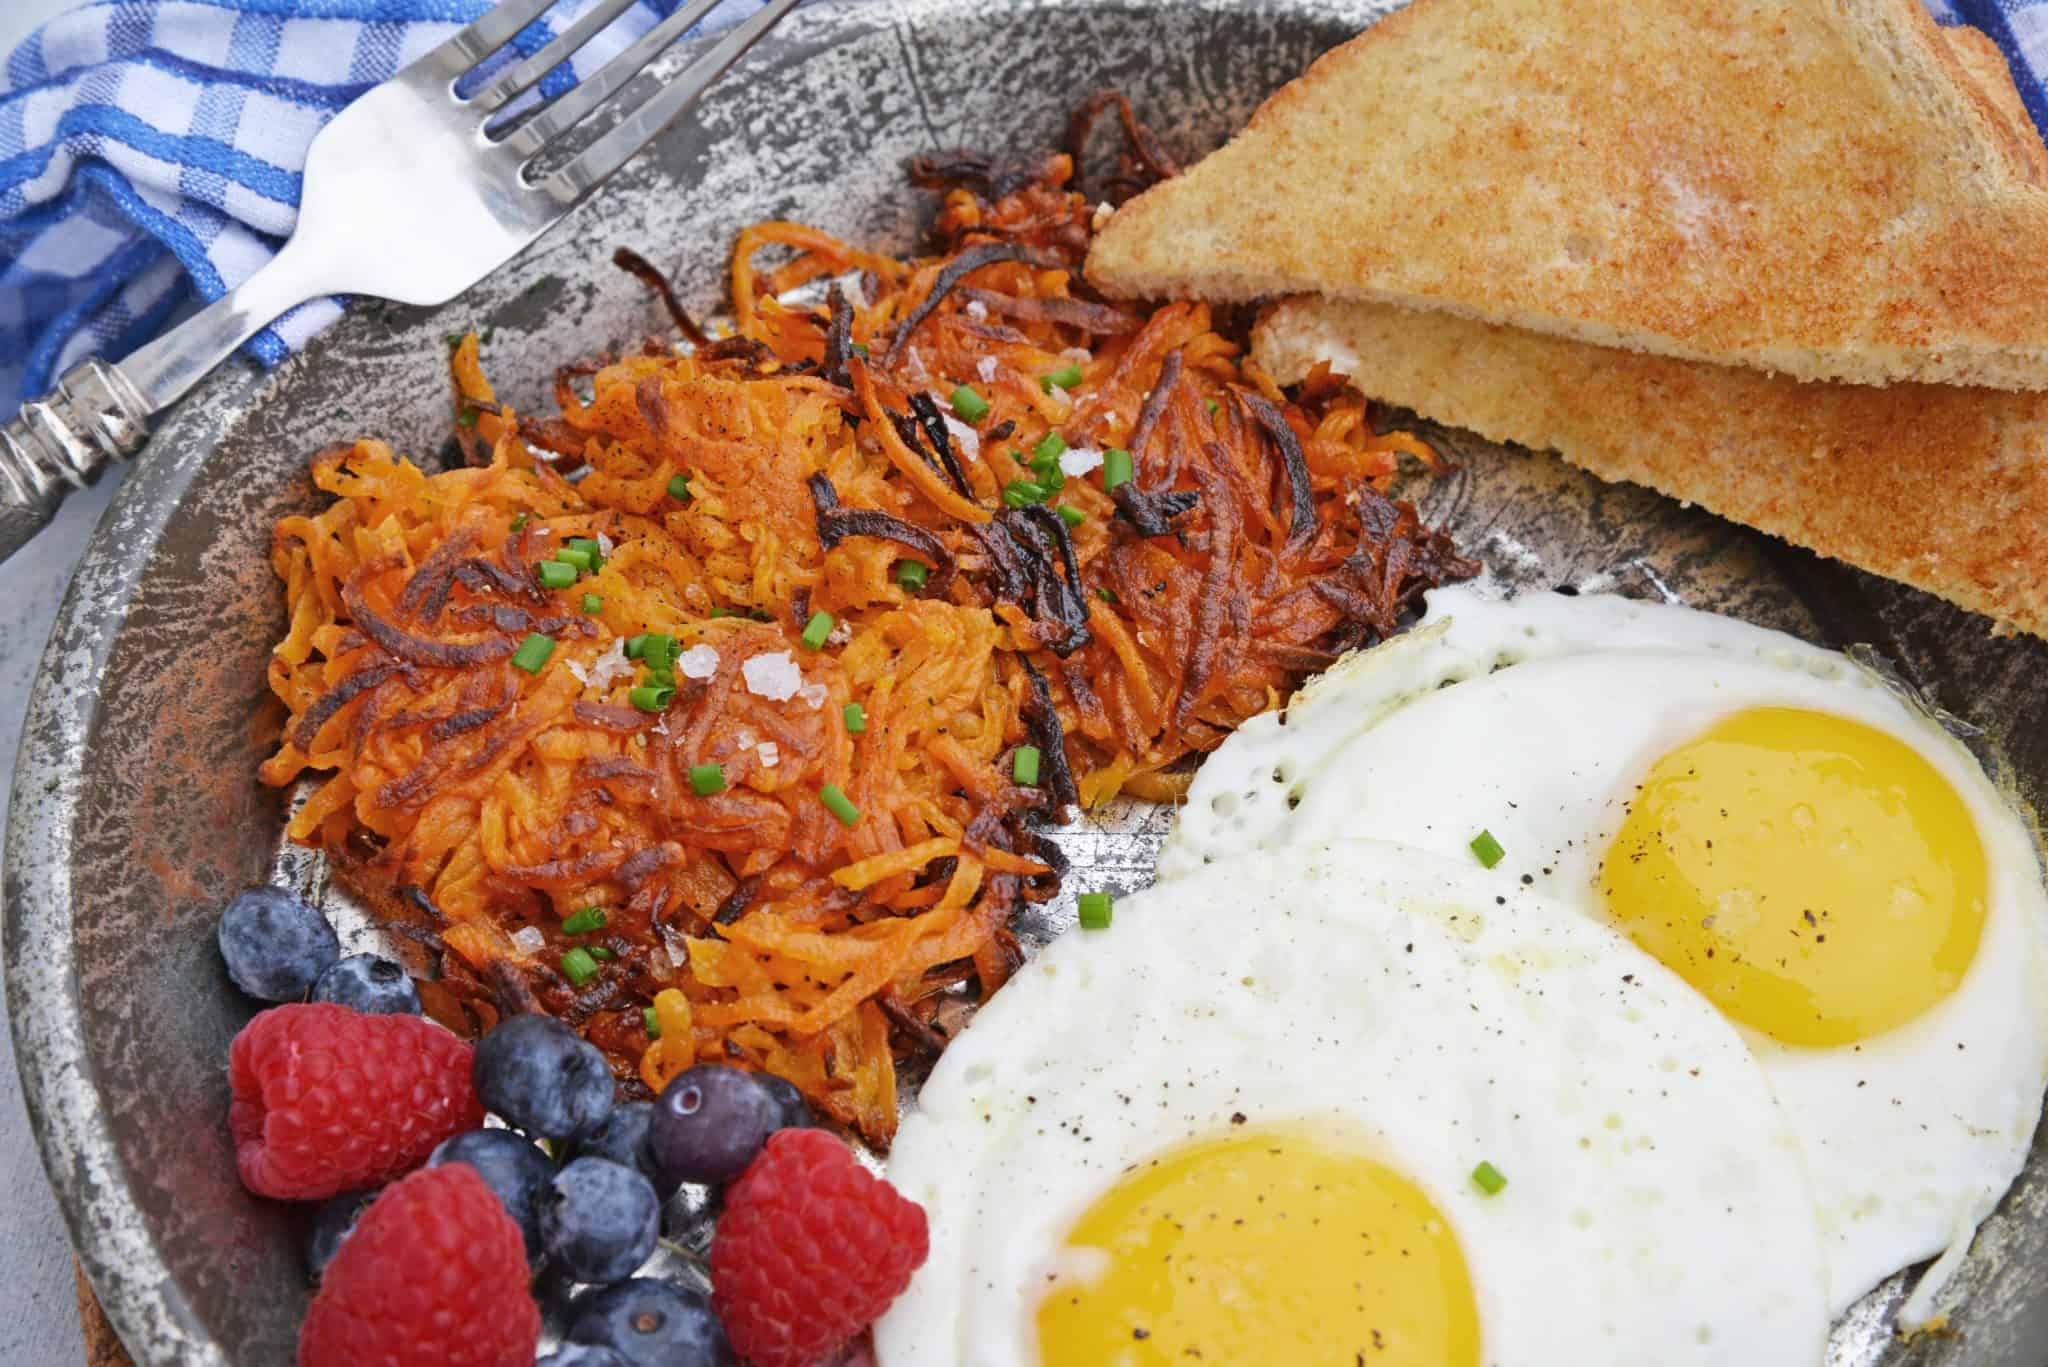 Sweet Potato Hash Browns are a simple breakfast recipe made with shredded sweet potatoes. Only 3 ingredients and a few minutes to cook! #sweetpotatohashbrowns #shreddedsweetpotatoes www.savoryexperiments.com